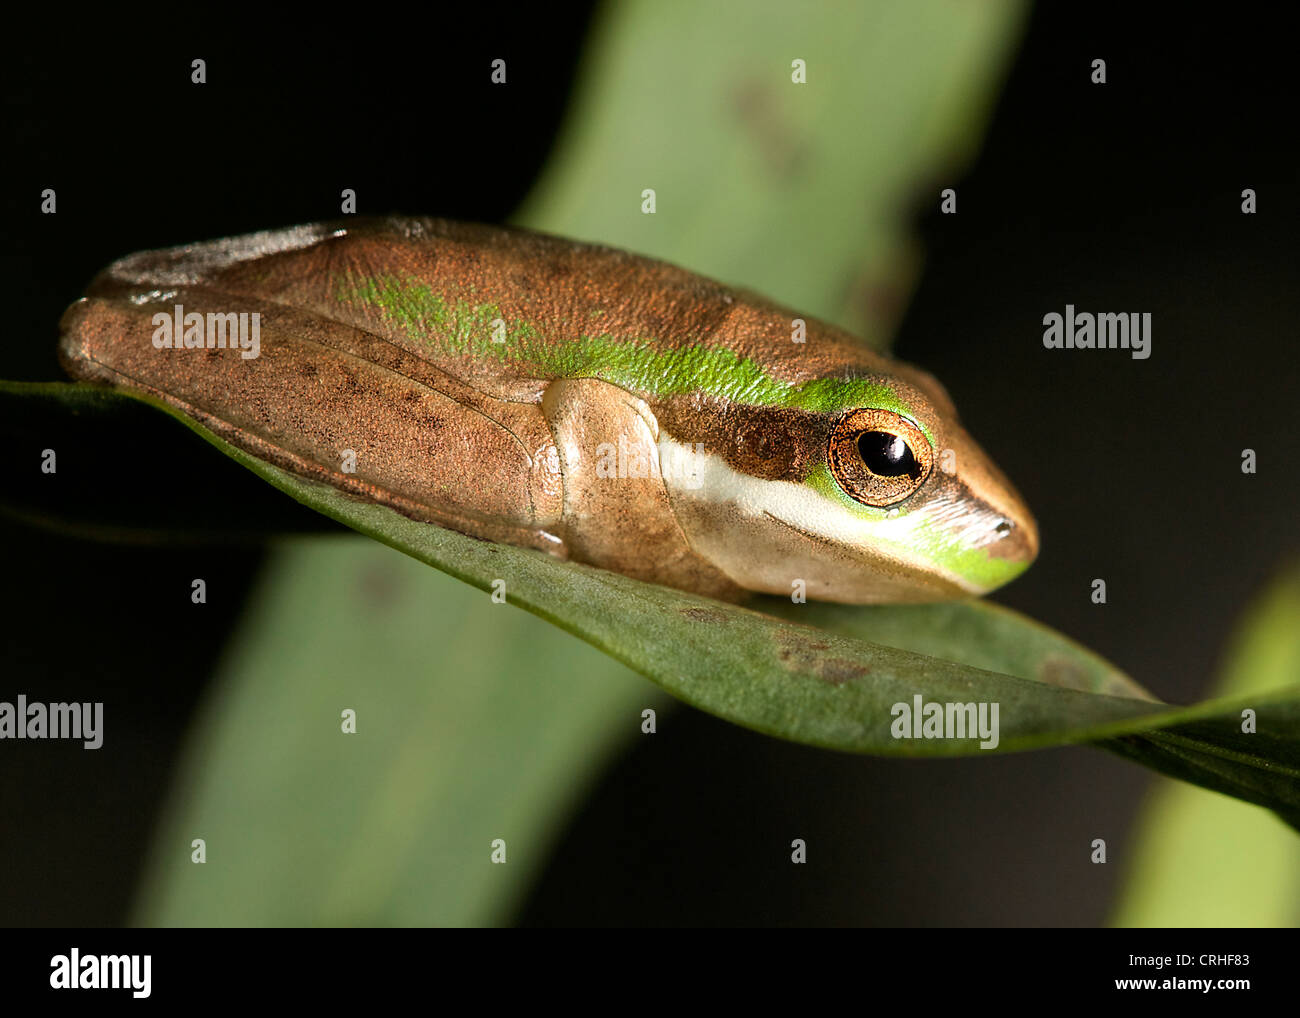 green frog sitting on leaf Stock Photo